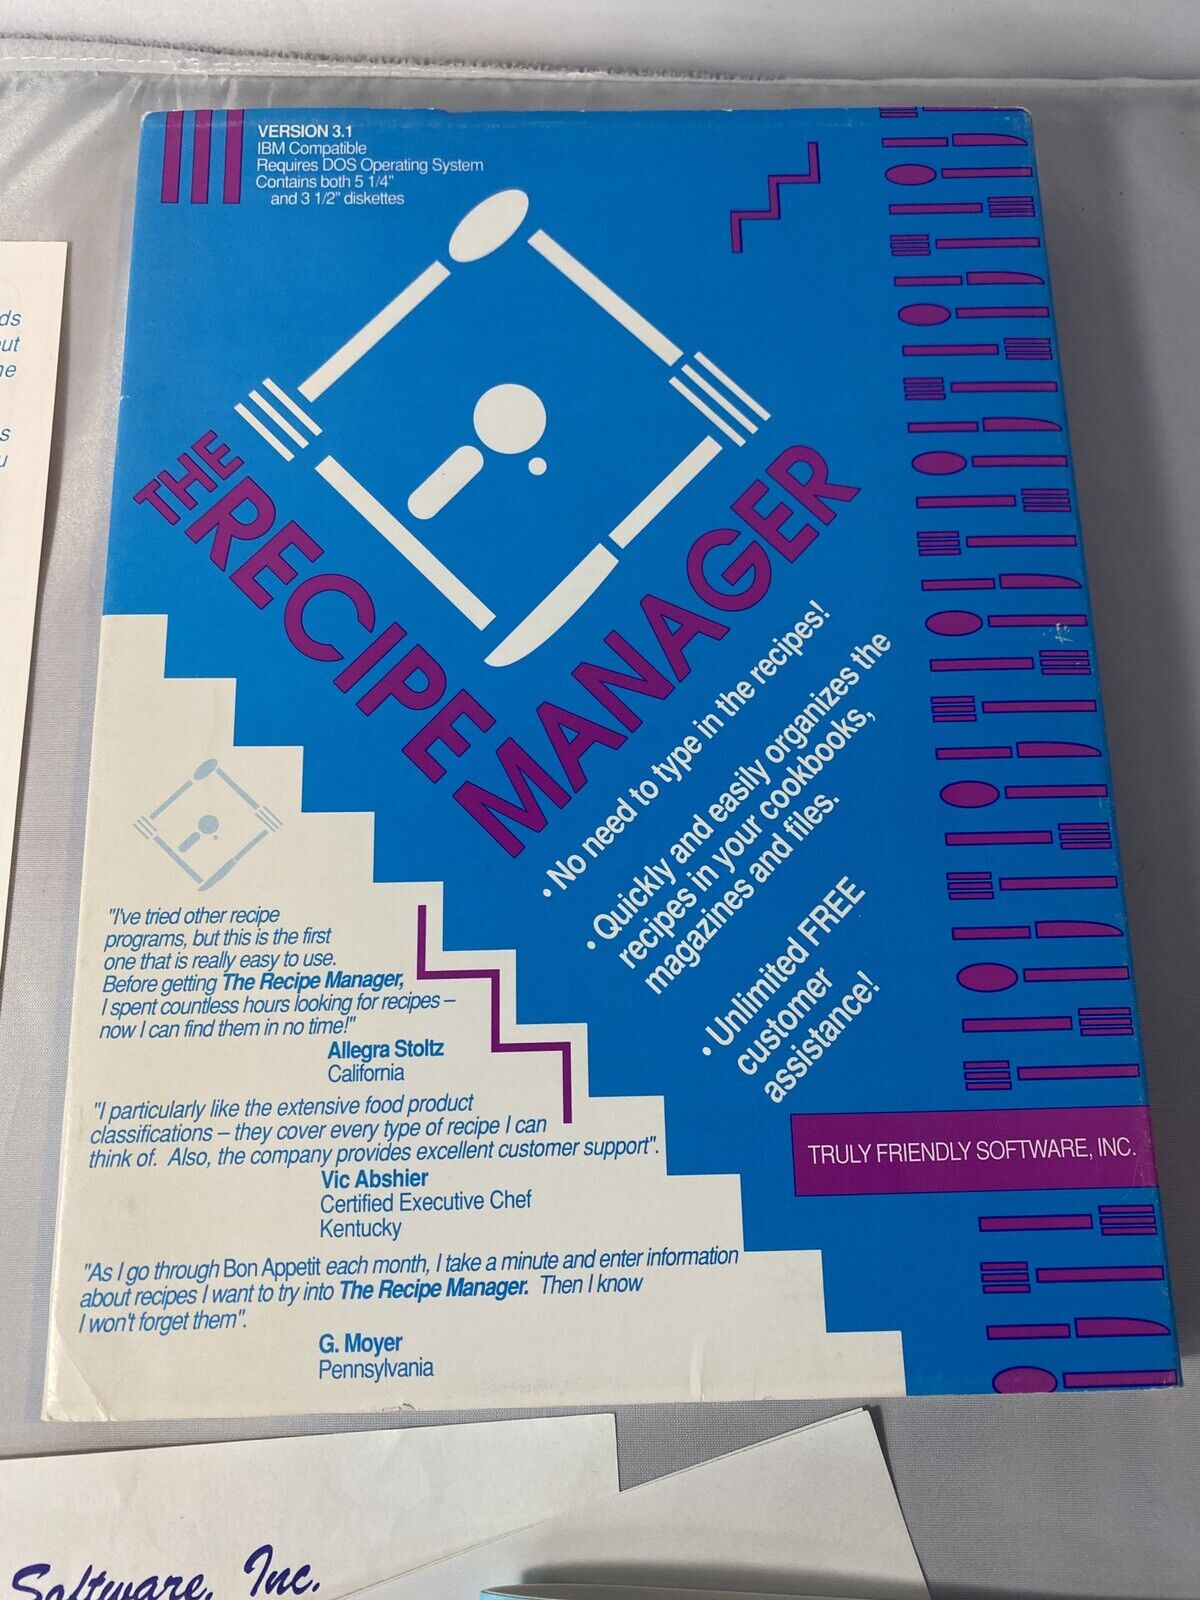 IBM / MS-Dos The Recipe Manager Software 3.5” Floppy - 1992 Vintage Computing